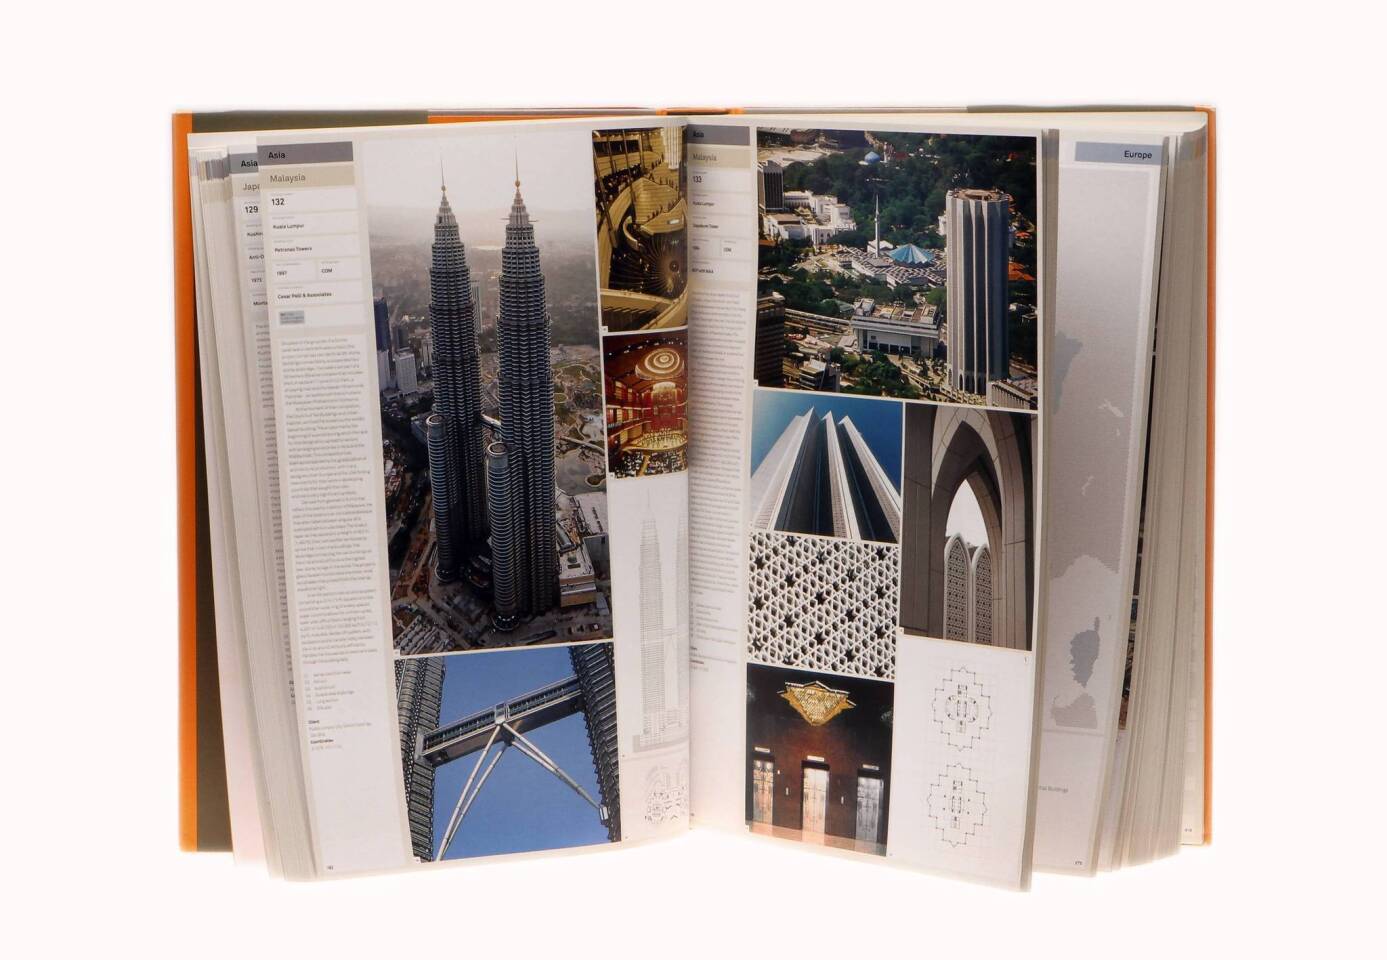 20th Century World Architecture The Phaidon Atlas Editors of Phaidon Phaidon Press, $200 An overview of 750 of the world's architectural icons and regional masterpieces.